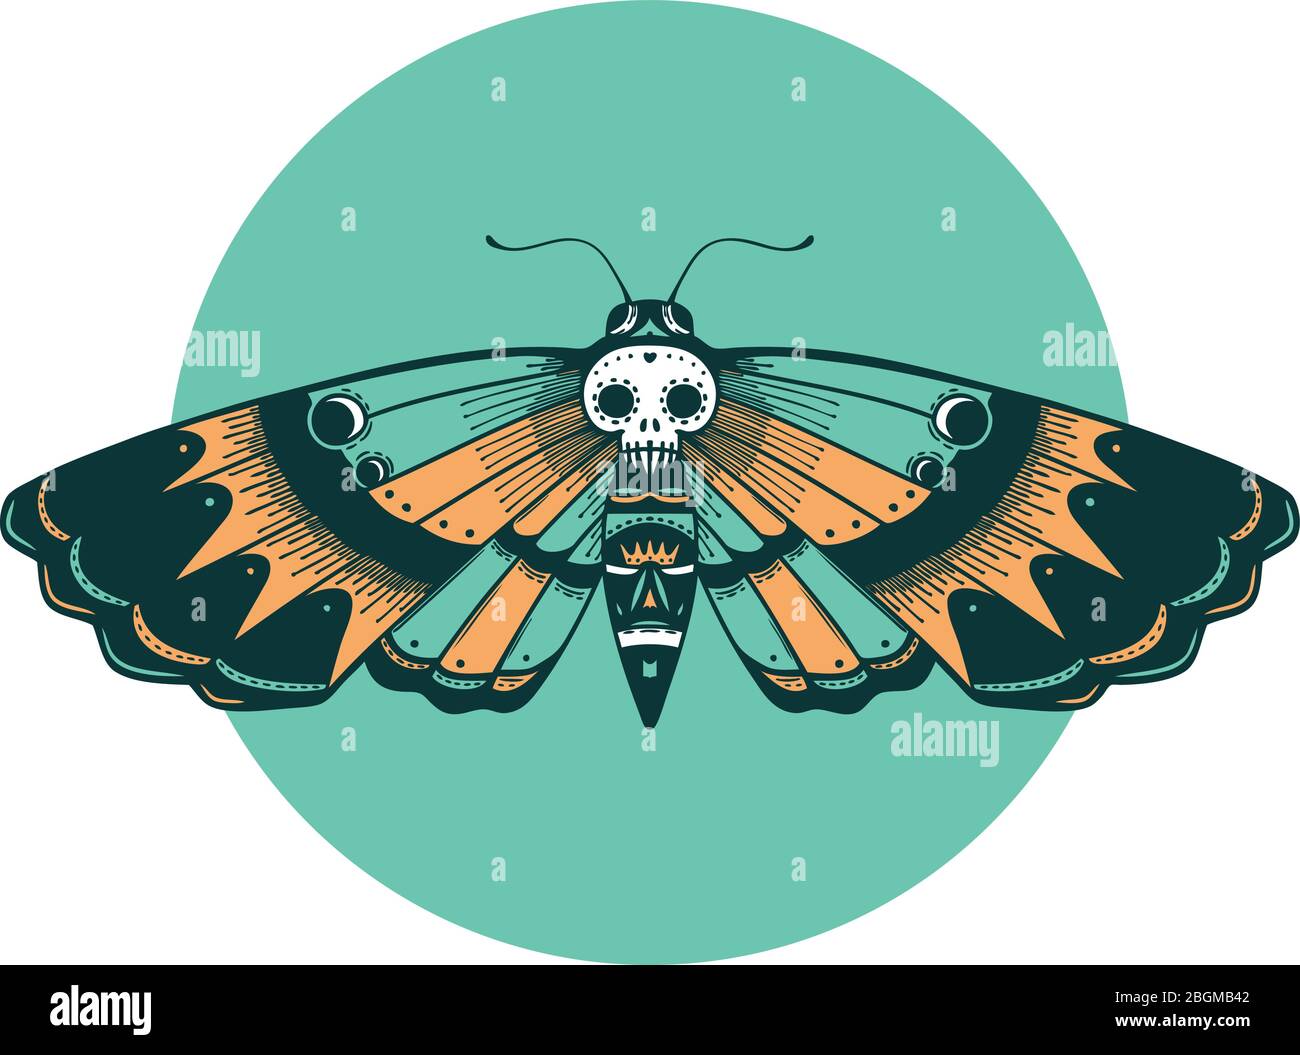 Death Head Moth Tattoo Meanings and Ideas  Tat Hit